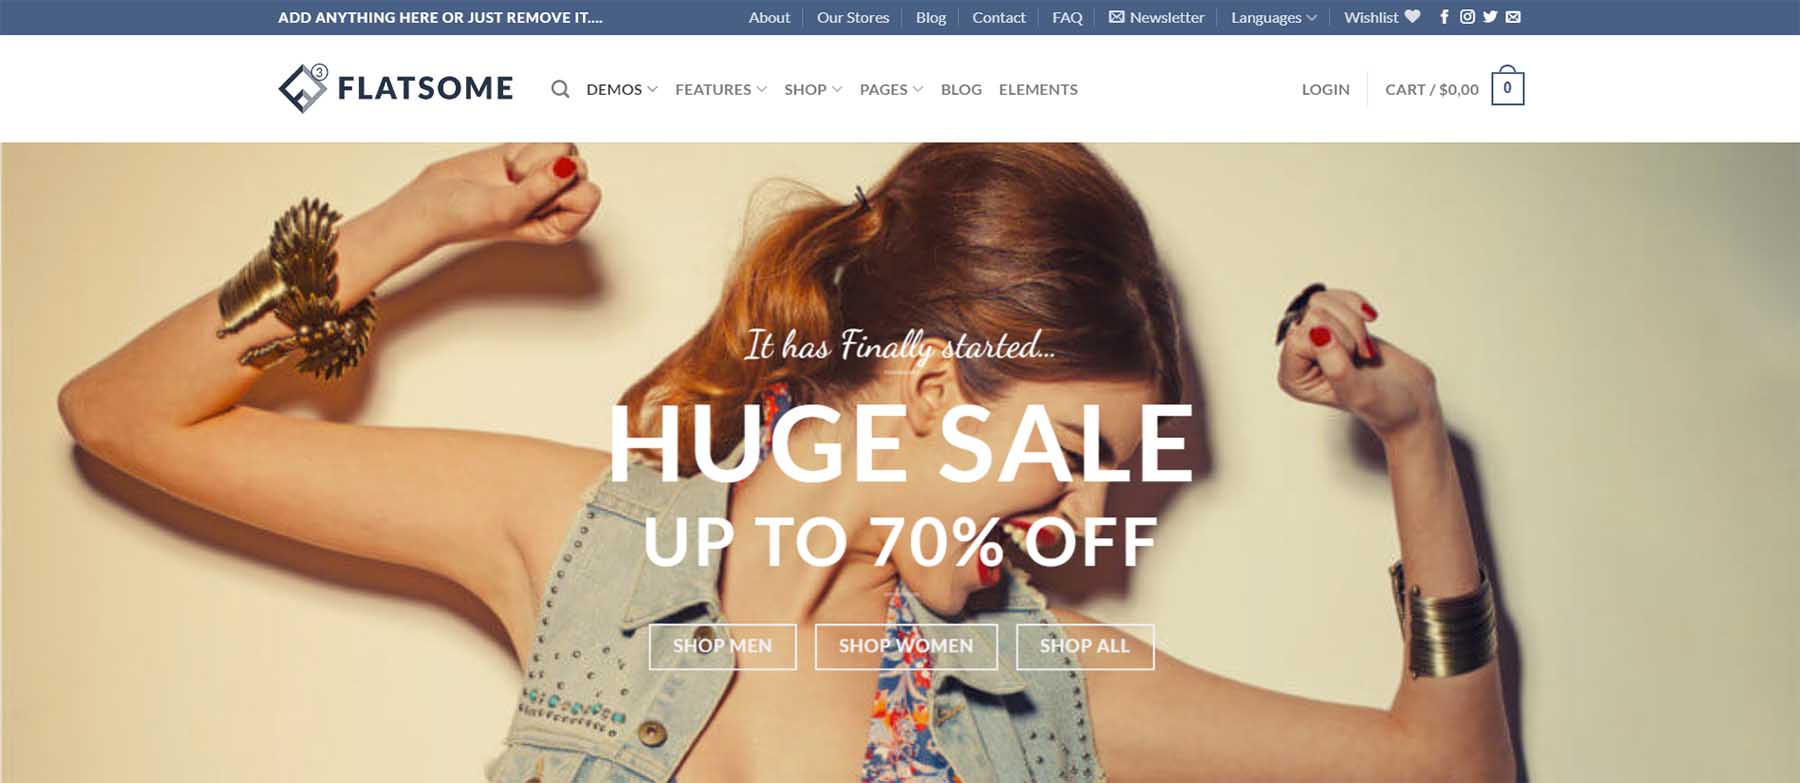 Flatsome best WordPress theme for an eCommerce business